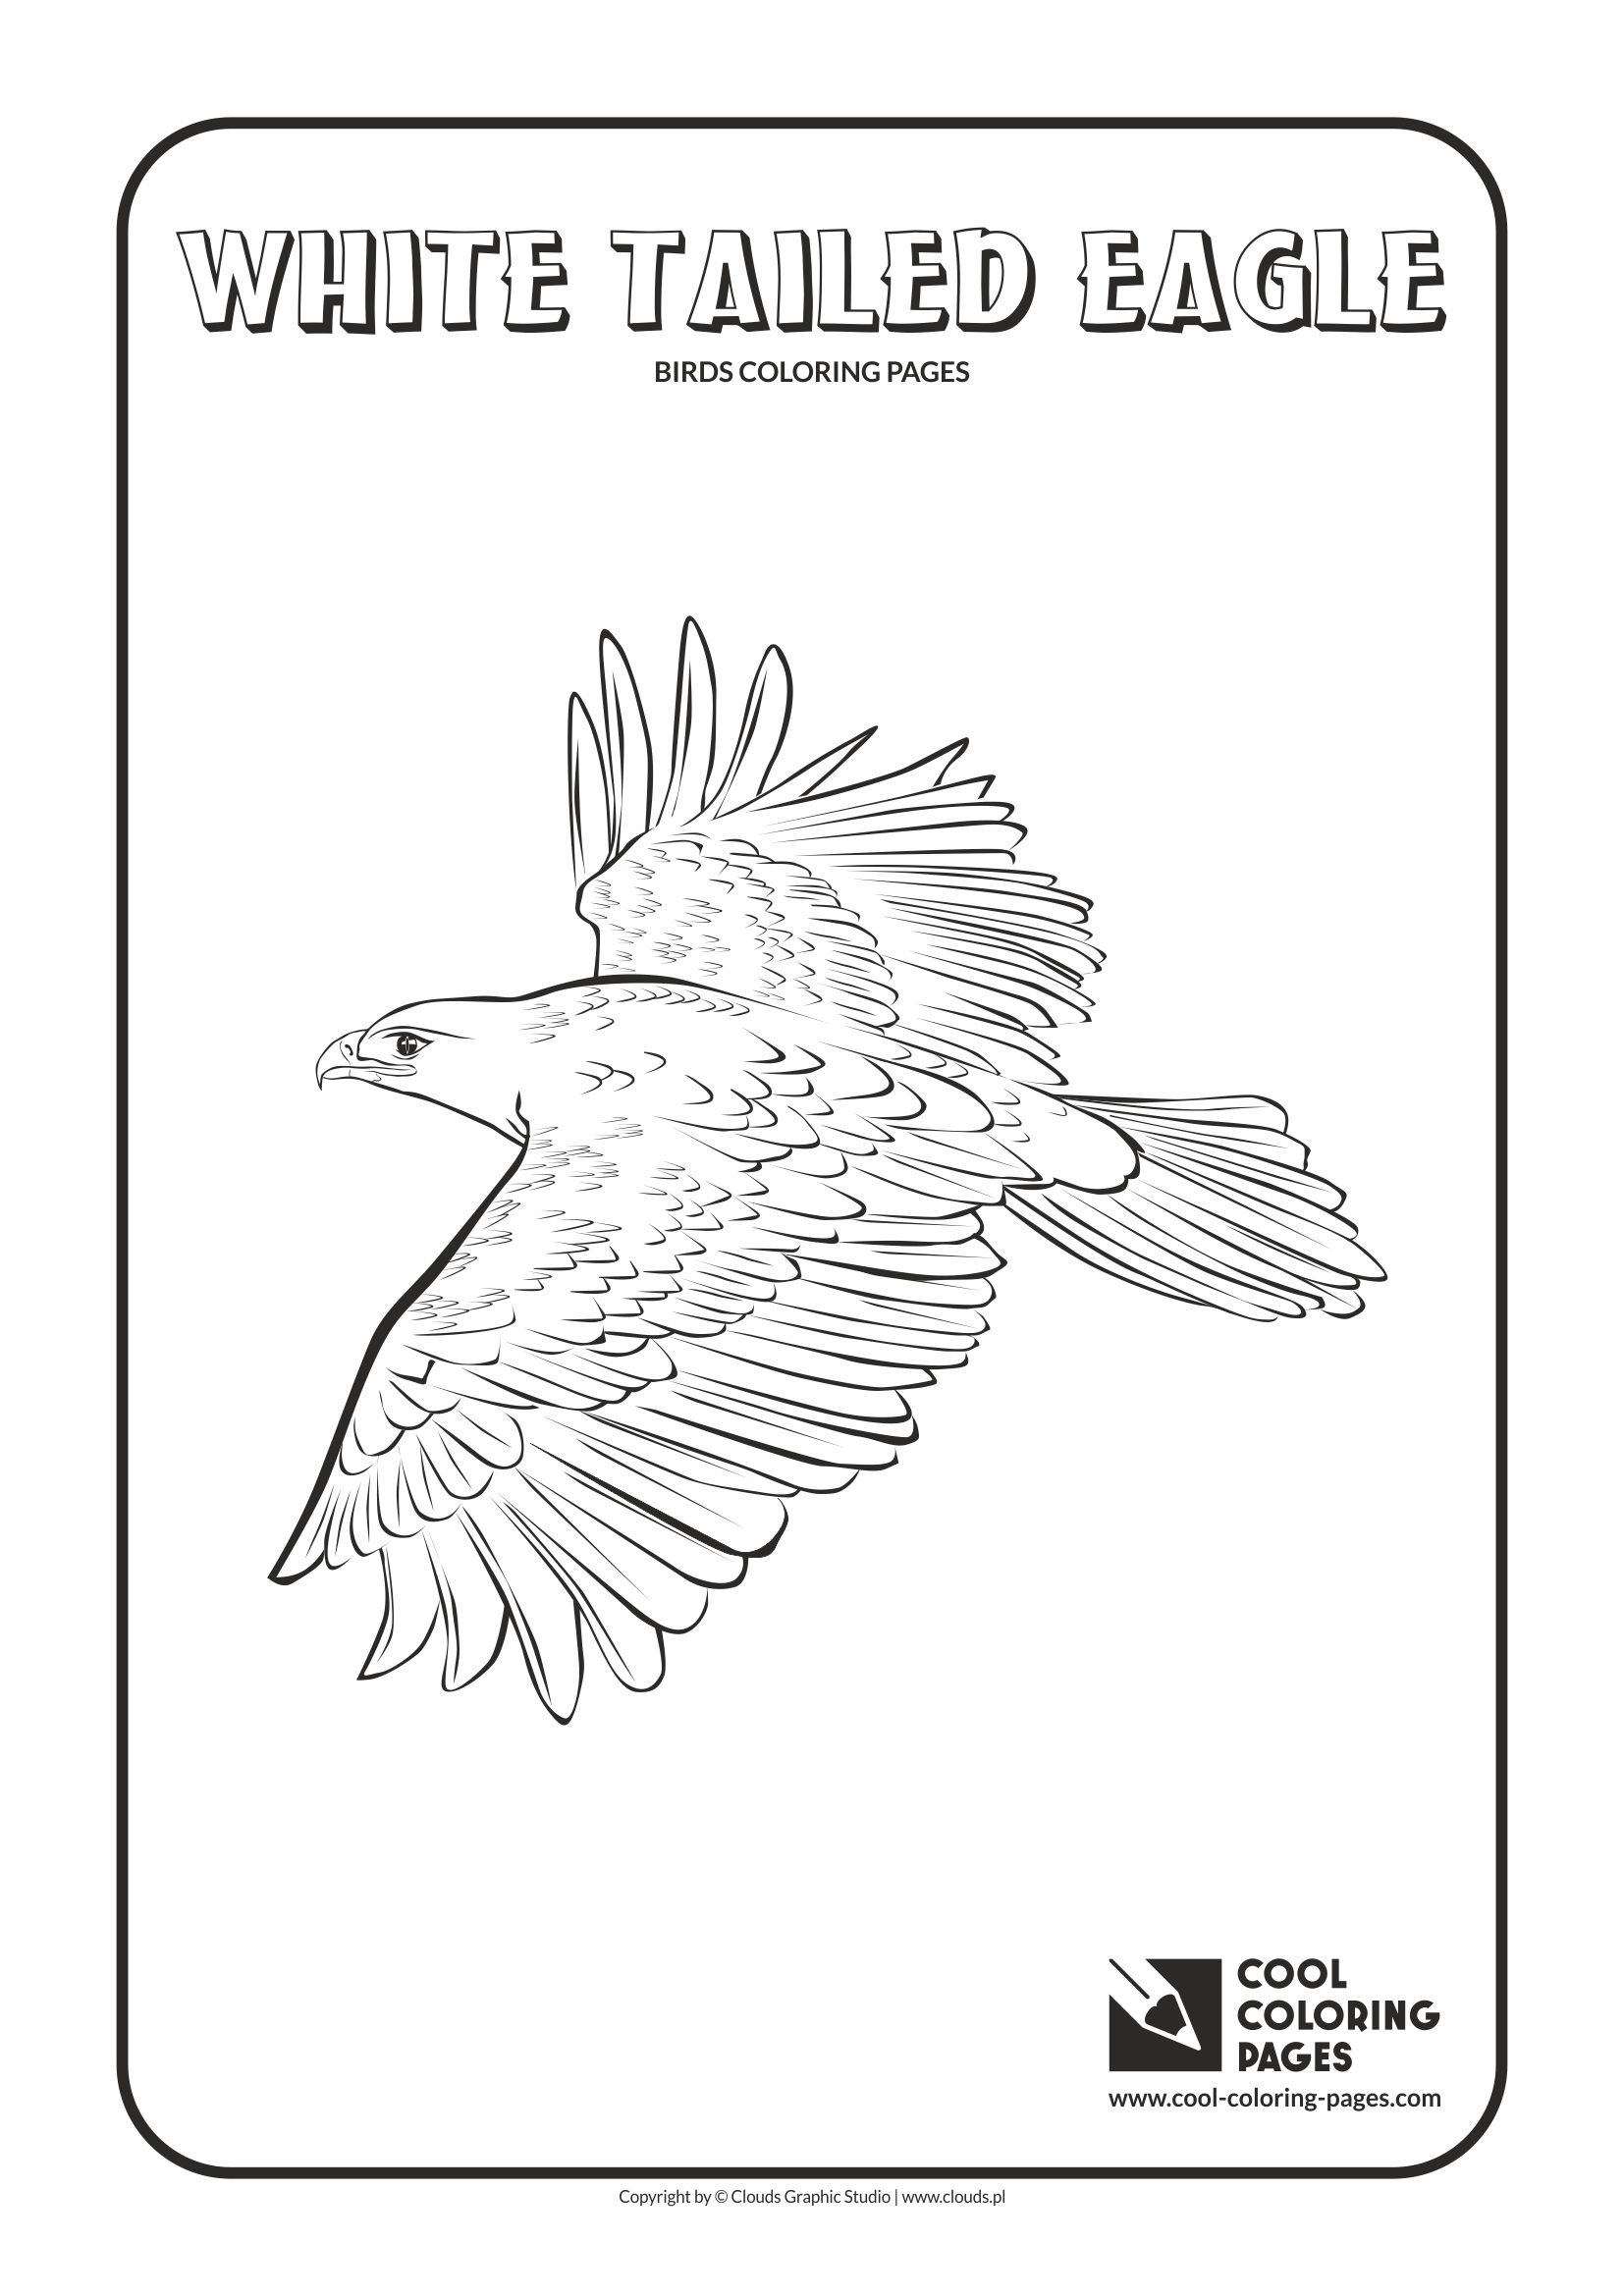 Cool Coloring Pages - Animals / White tailed eagle / Coloring page with white tailed eagle